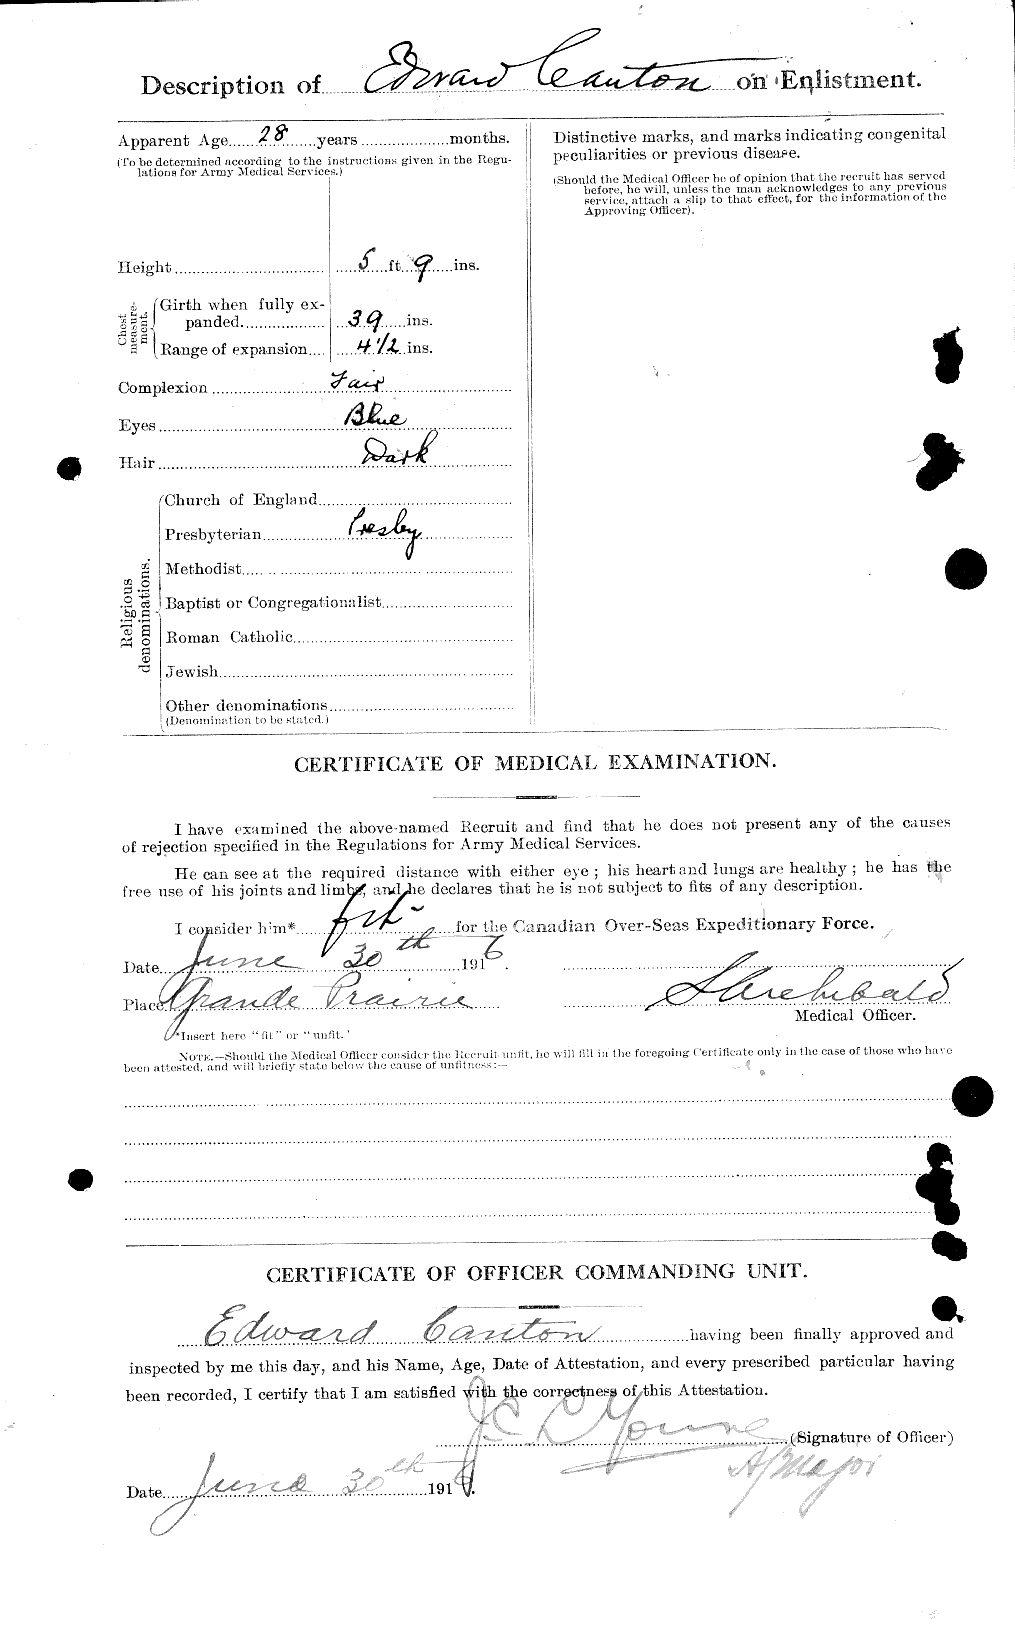 Personnel Records of the First World War - CEF 009121b